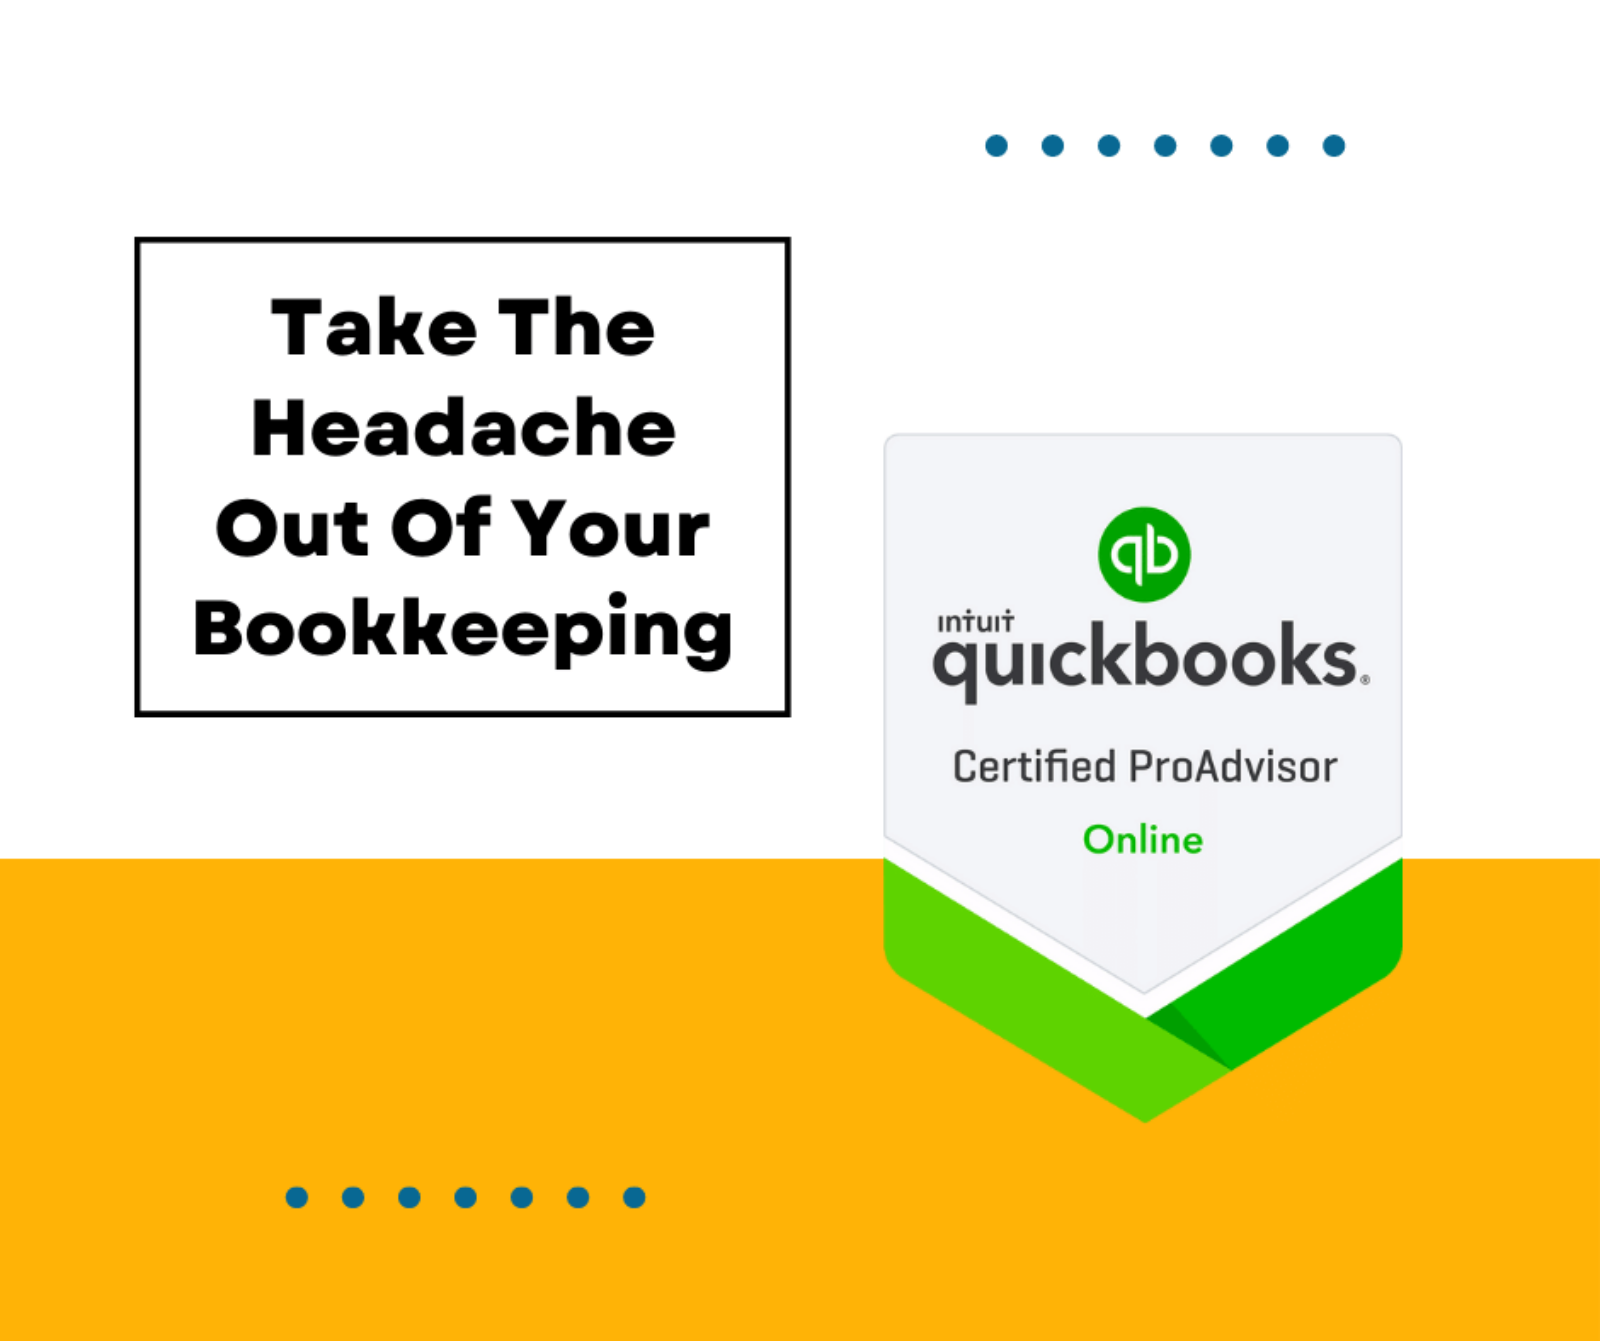 Benefits Of Having A Financial Advisor And Utilizing Quickbooks As Your Bookkeeping Software